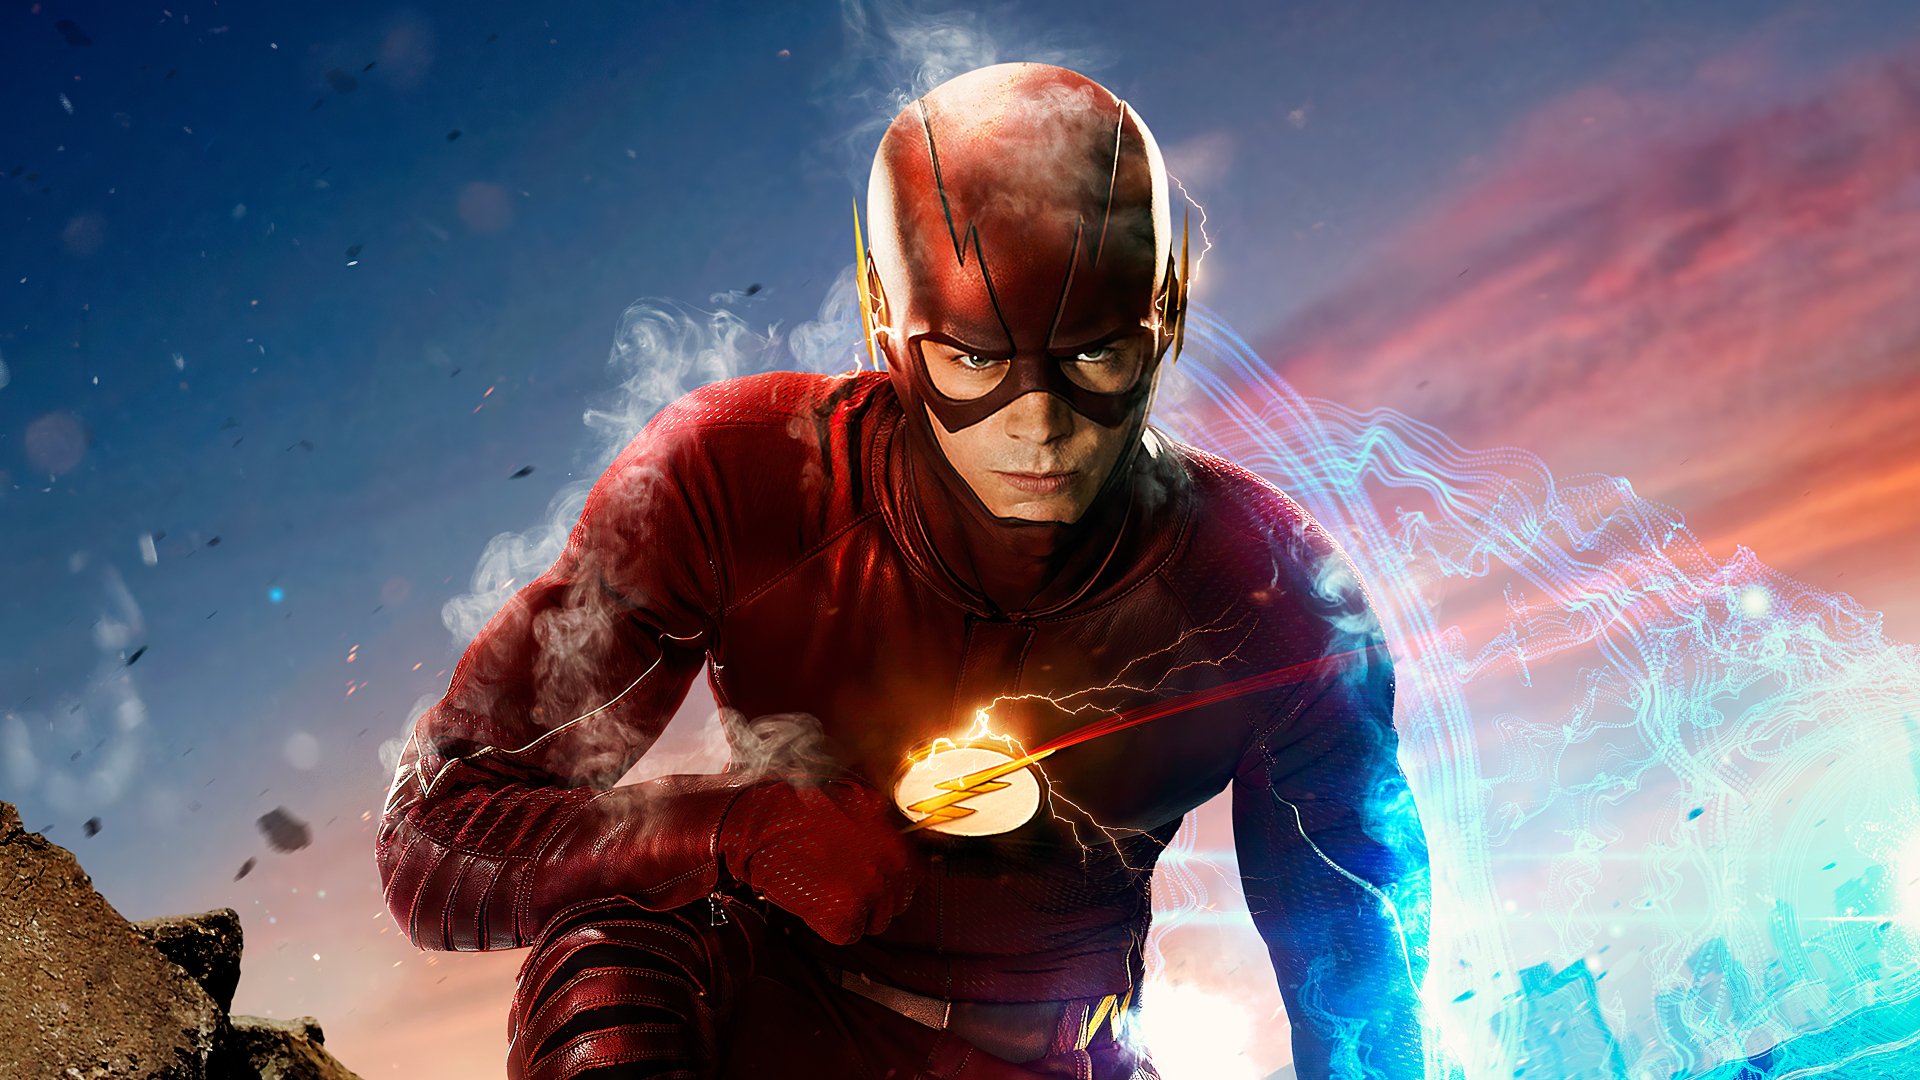 The Flash Tv Show 2017, HD Tv Shows, 4k Wallpapers, Images, Backgrounds ...